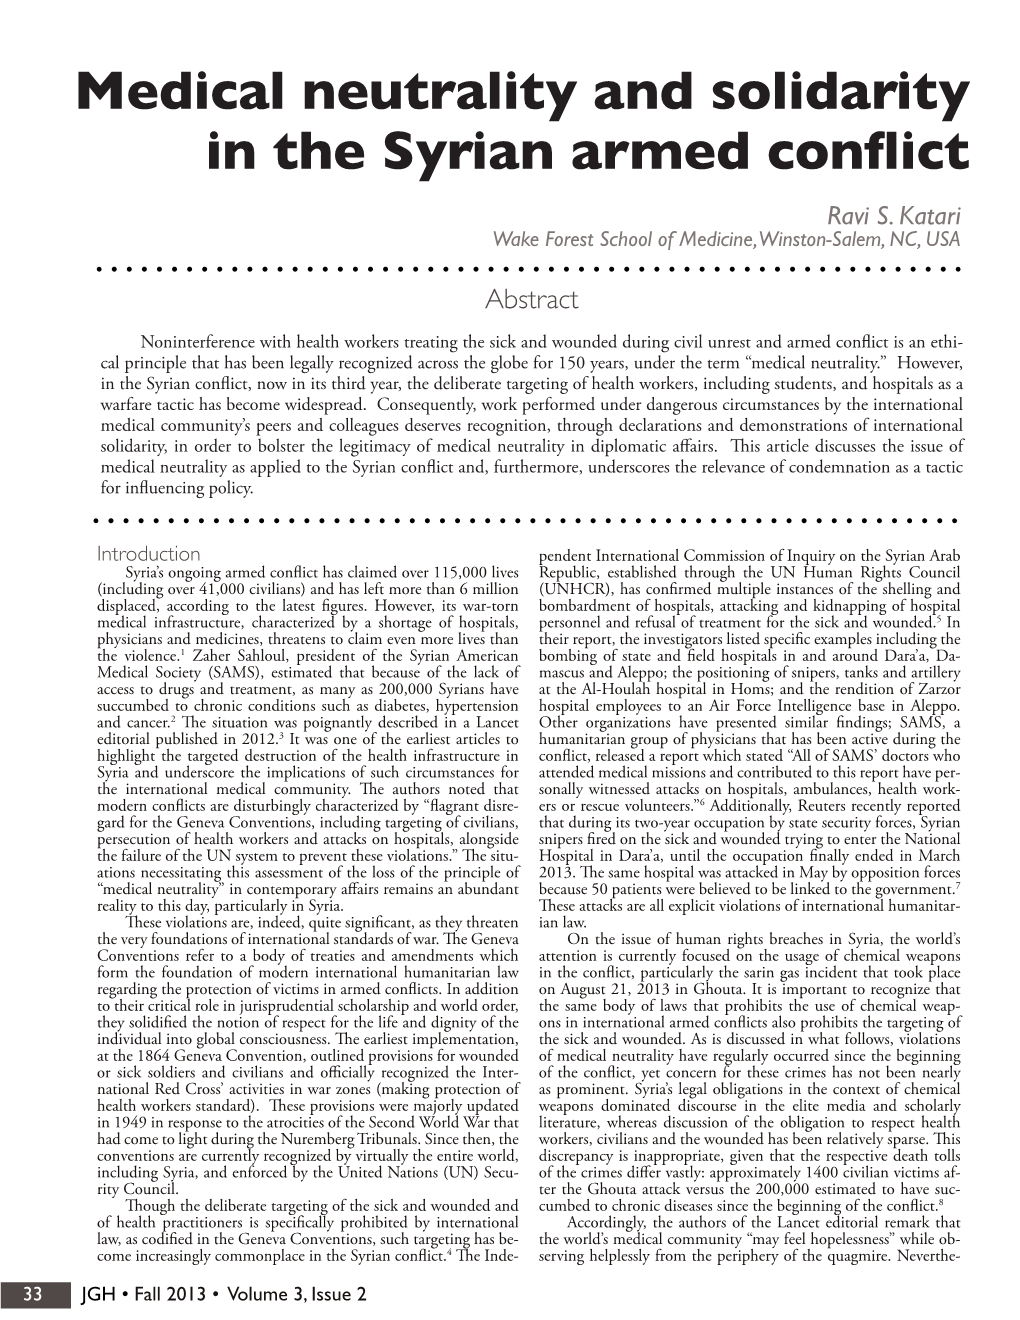 Medical Neutrality and Solidarity in the Syrian Armed Conflict Ravi S